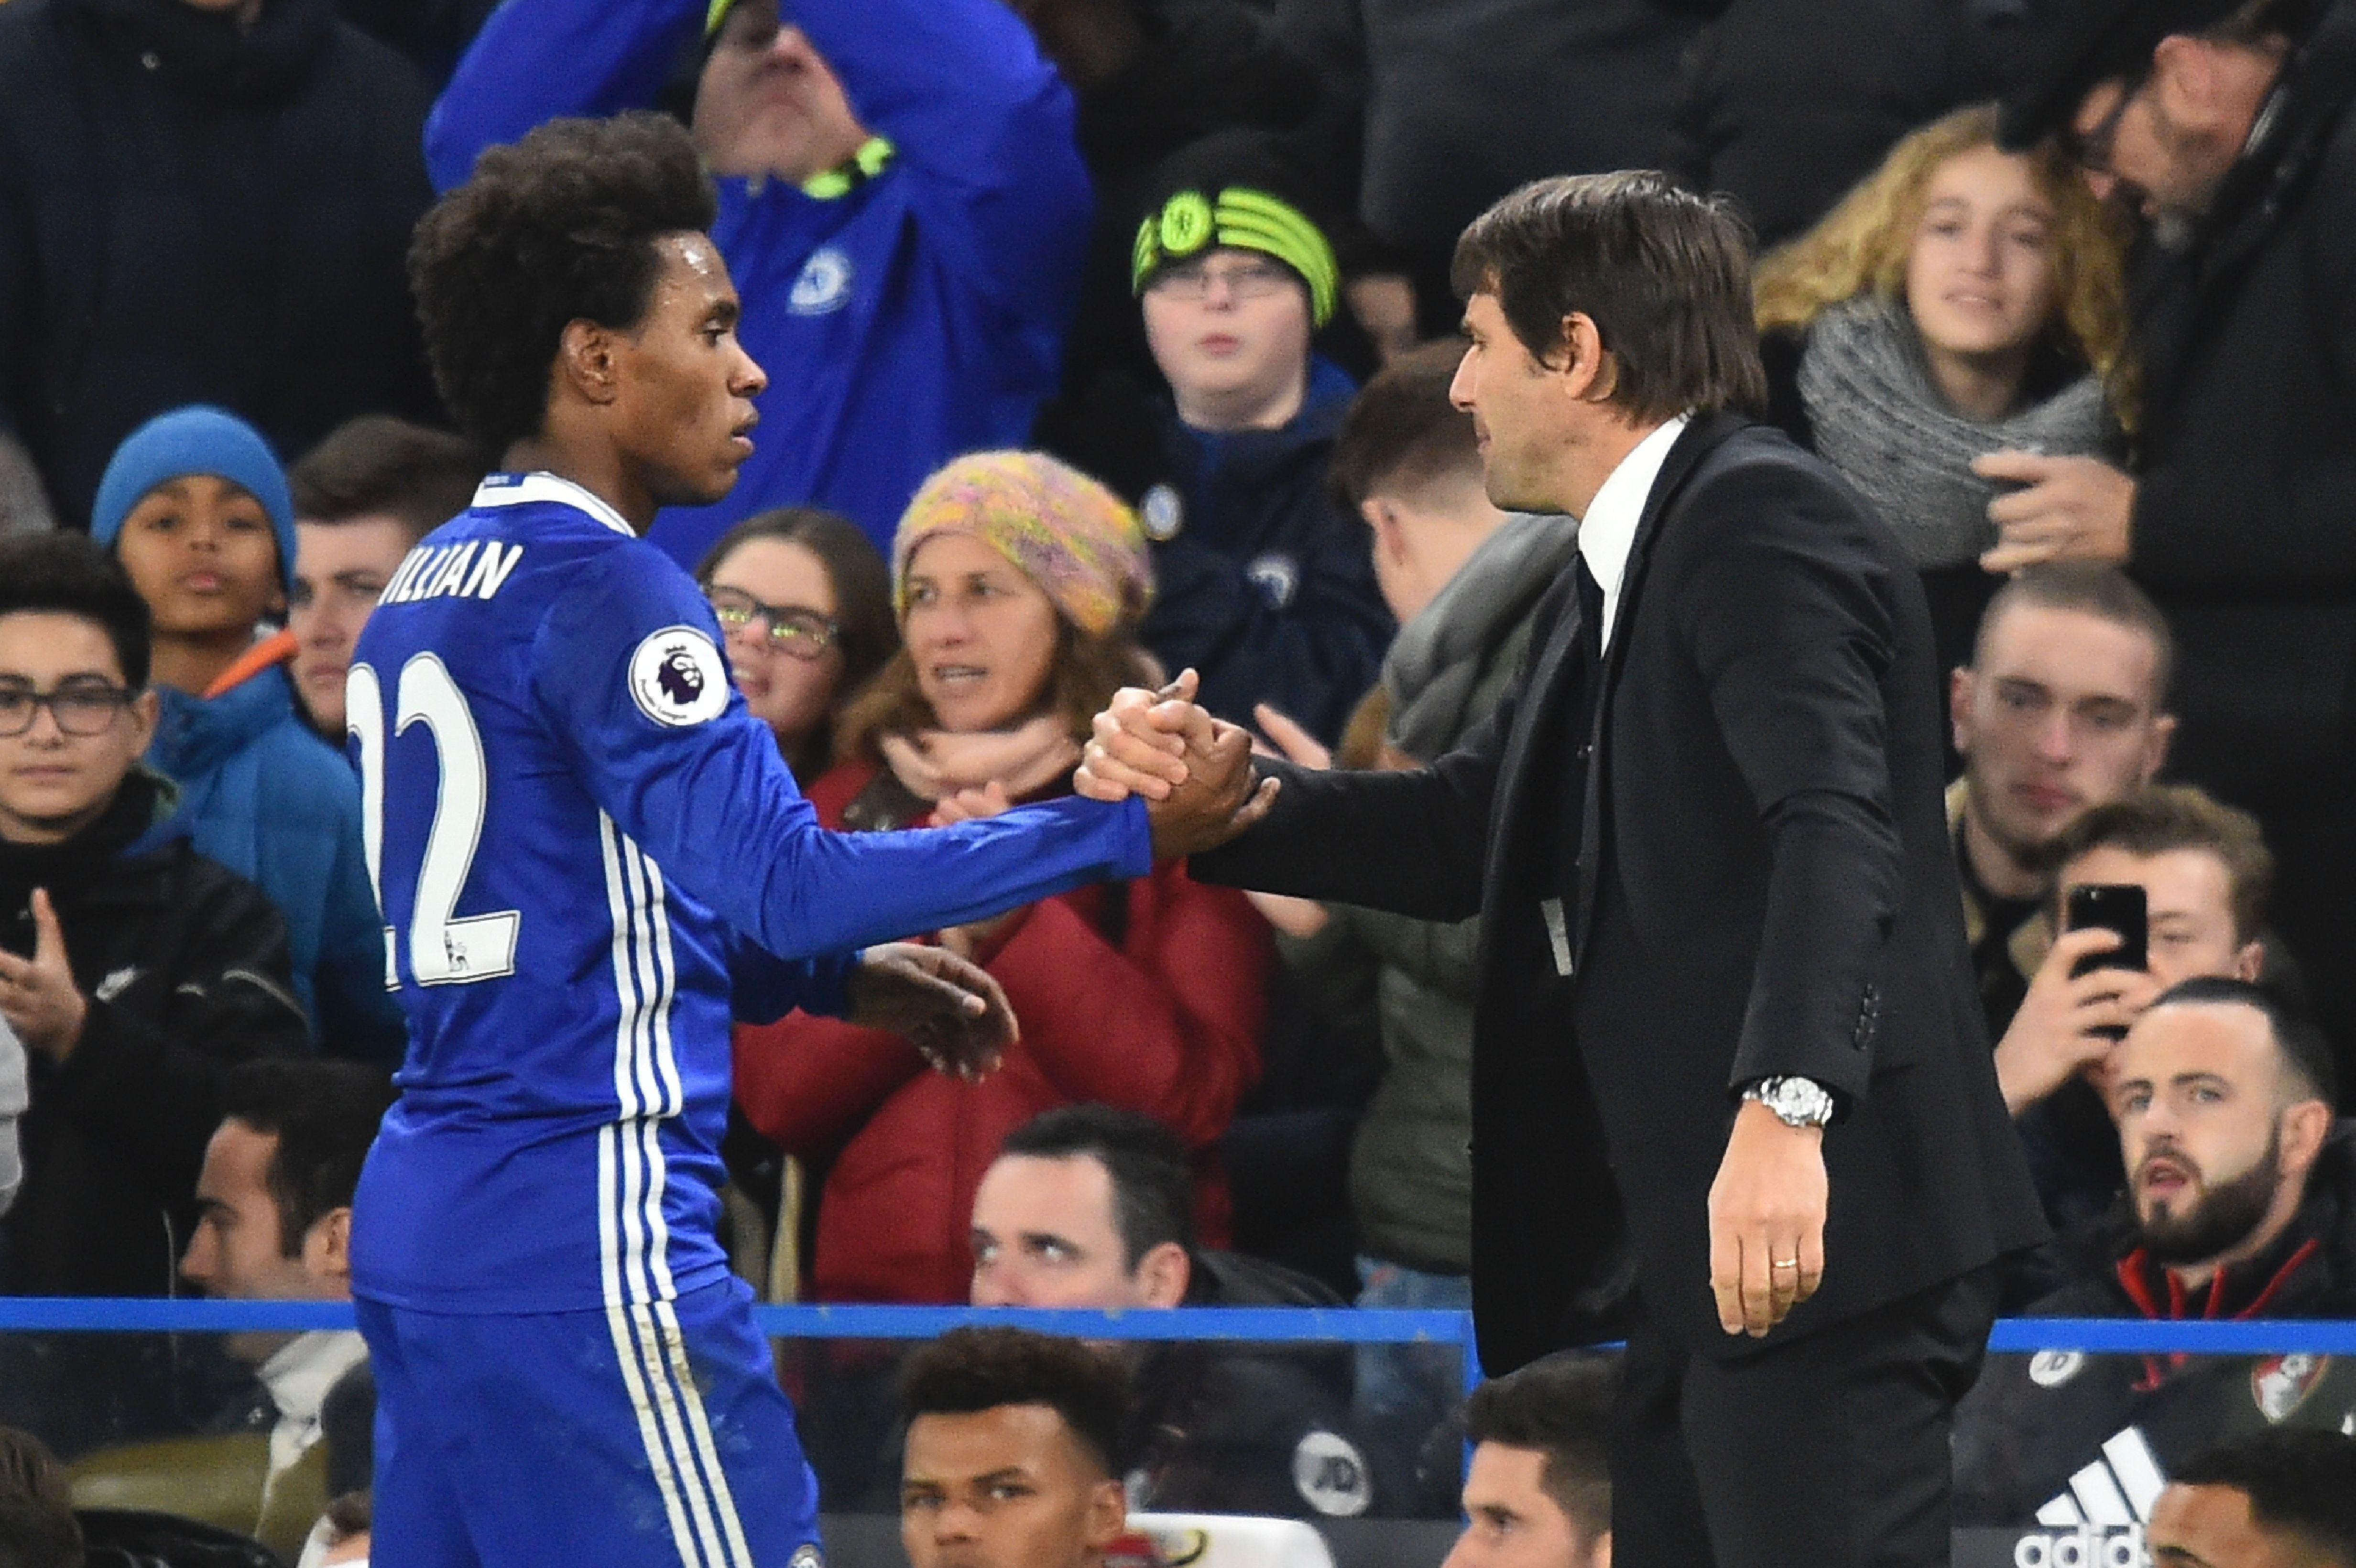 Chelsea winger Willian says Conte was 'difficult to work with' and explains why he covered his face with emojis in FA Cup post